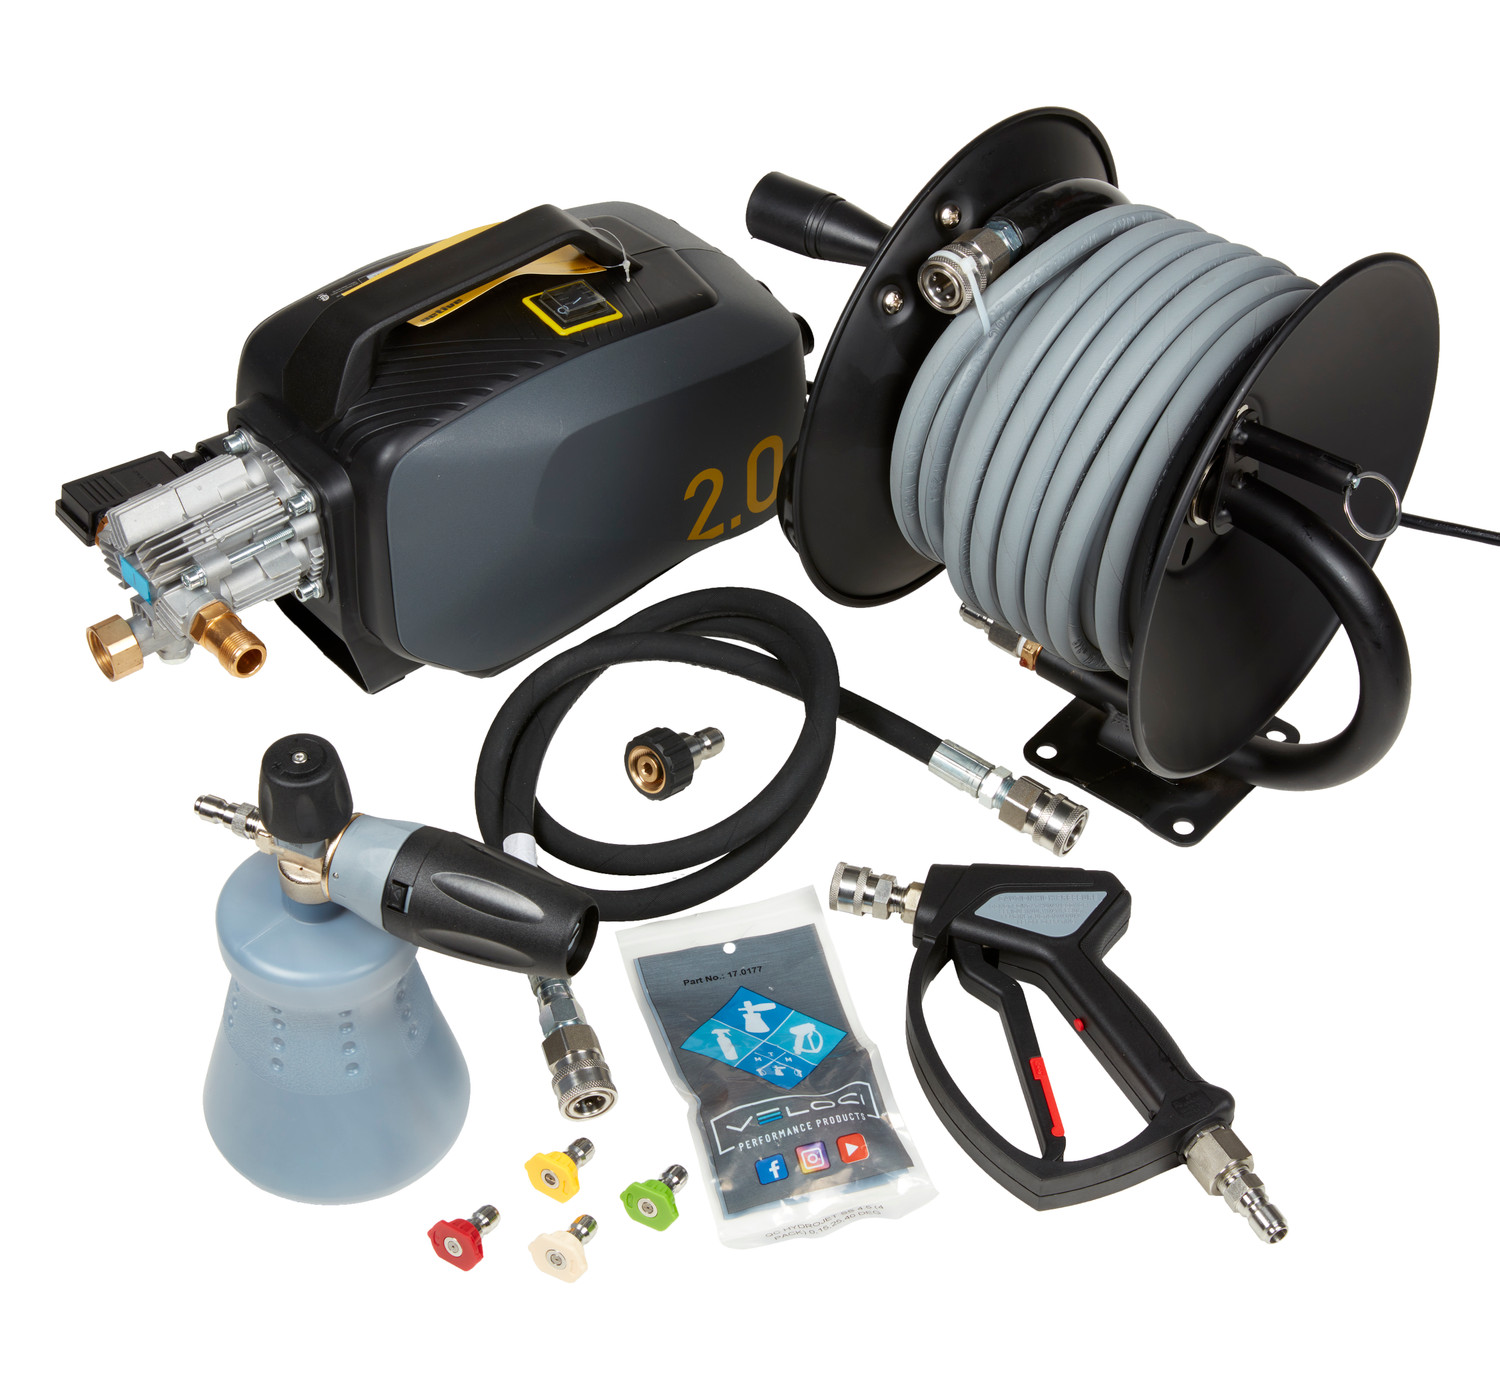 Active 2.0 Pressure Washer, Complete Wall Mount Package